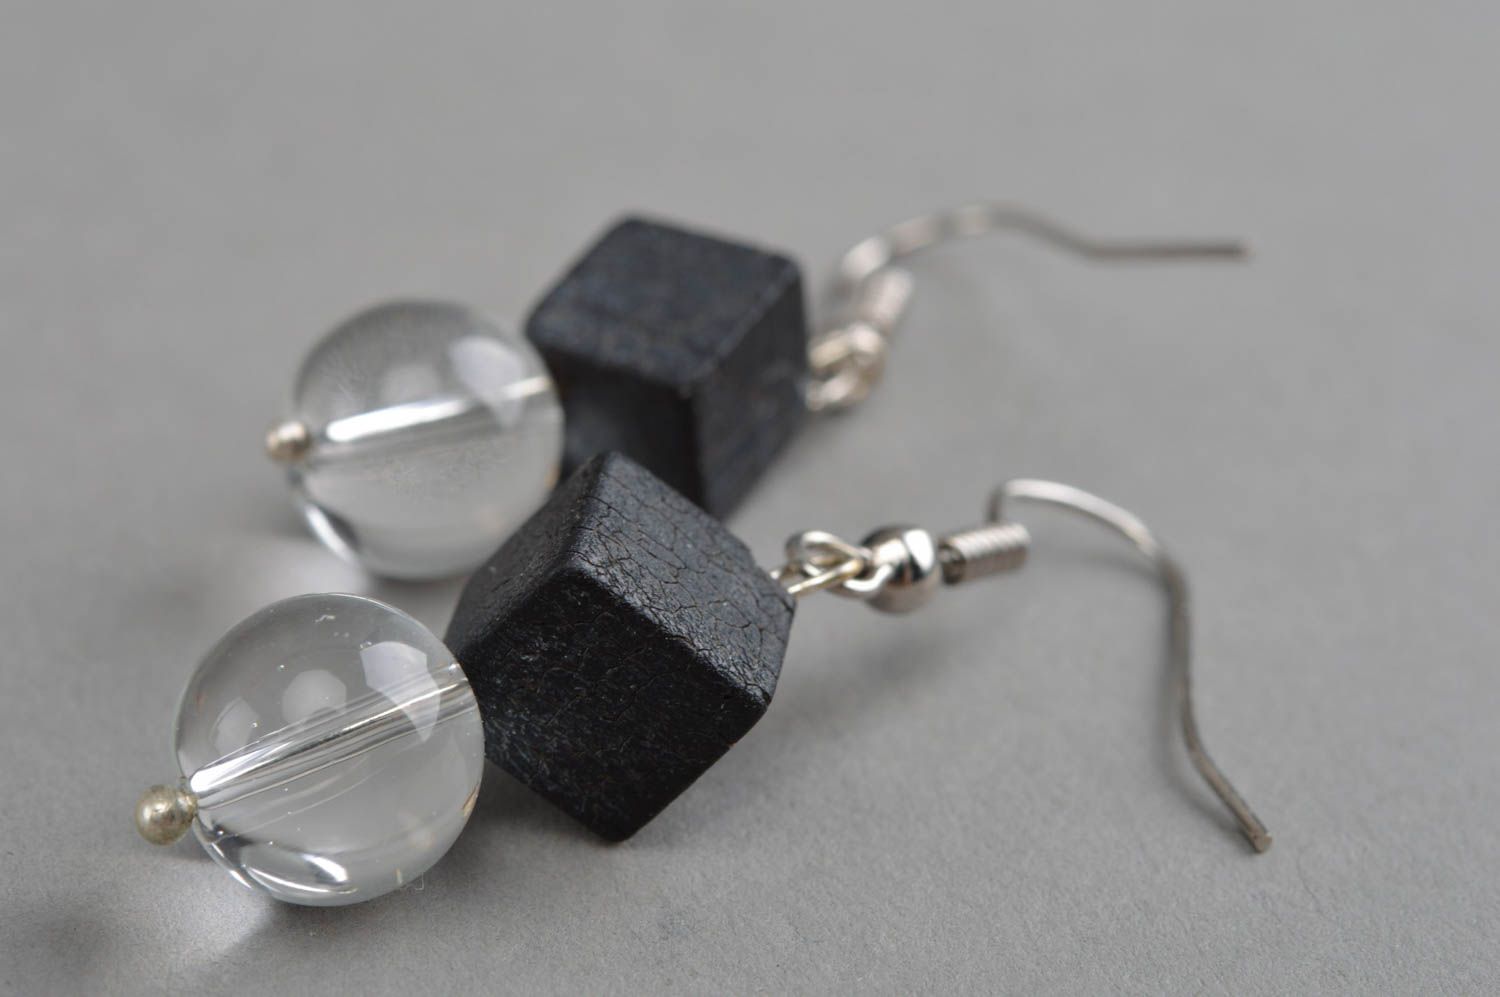 Handmade earrings made of natural stones unusual jewelry stylish accessories photo 3